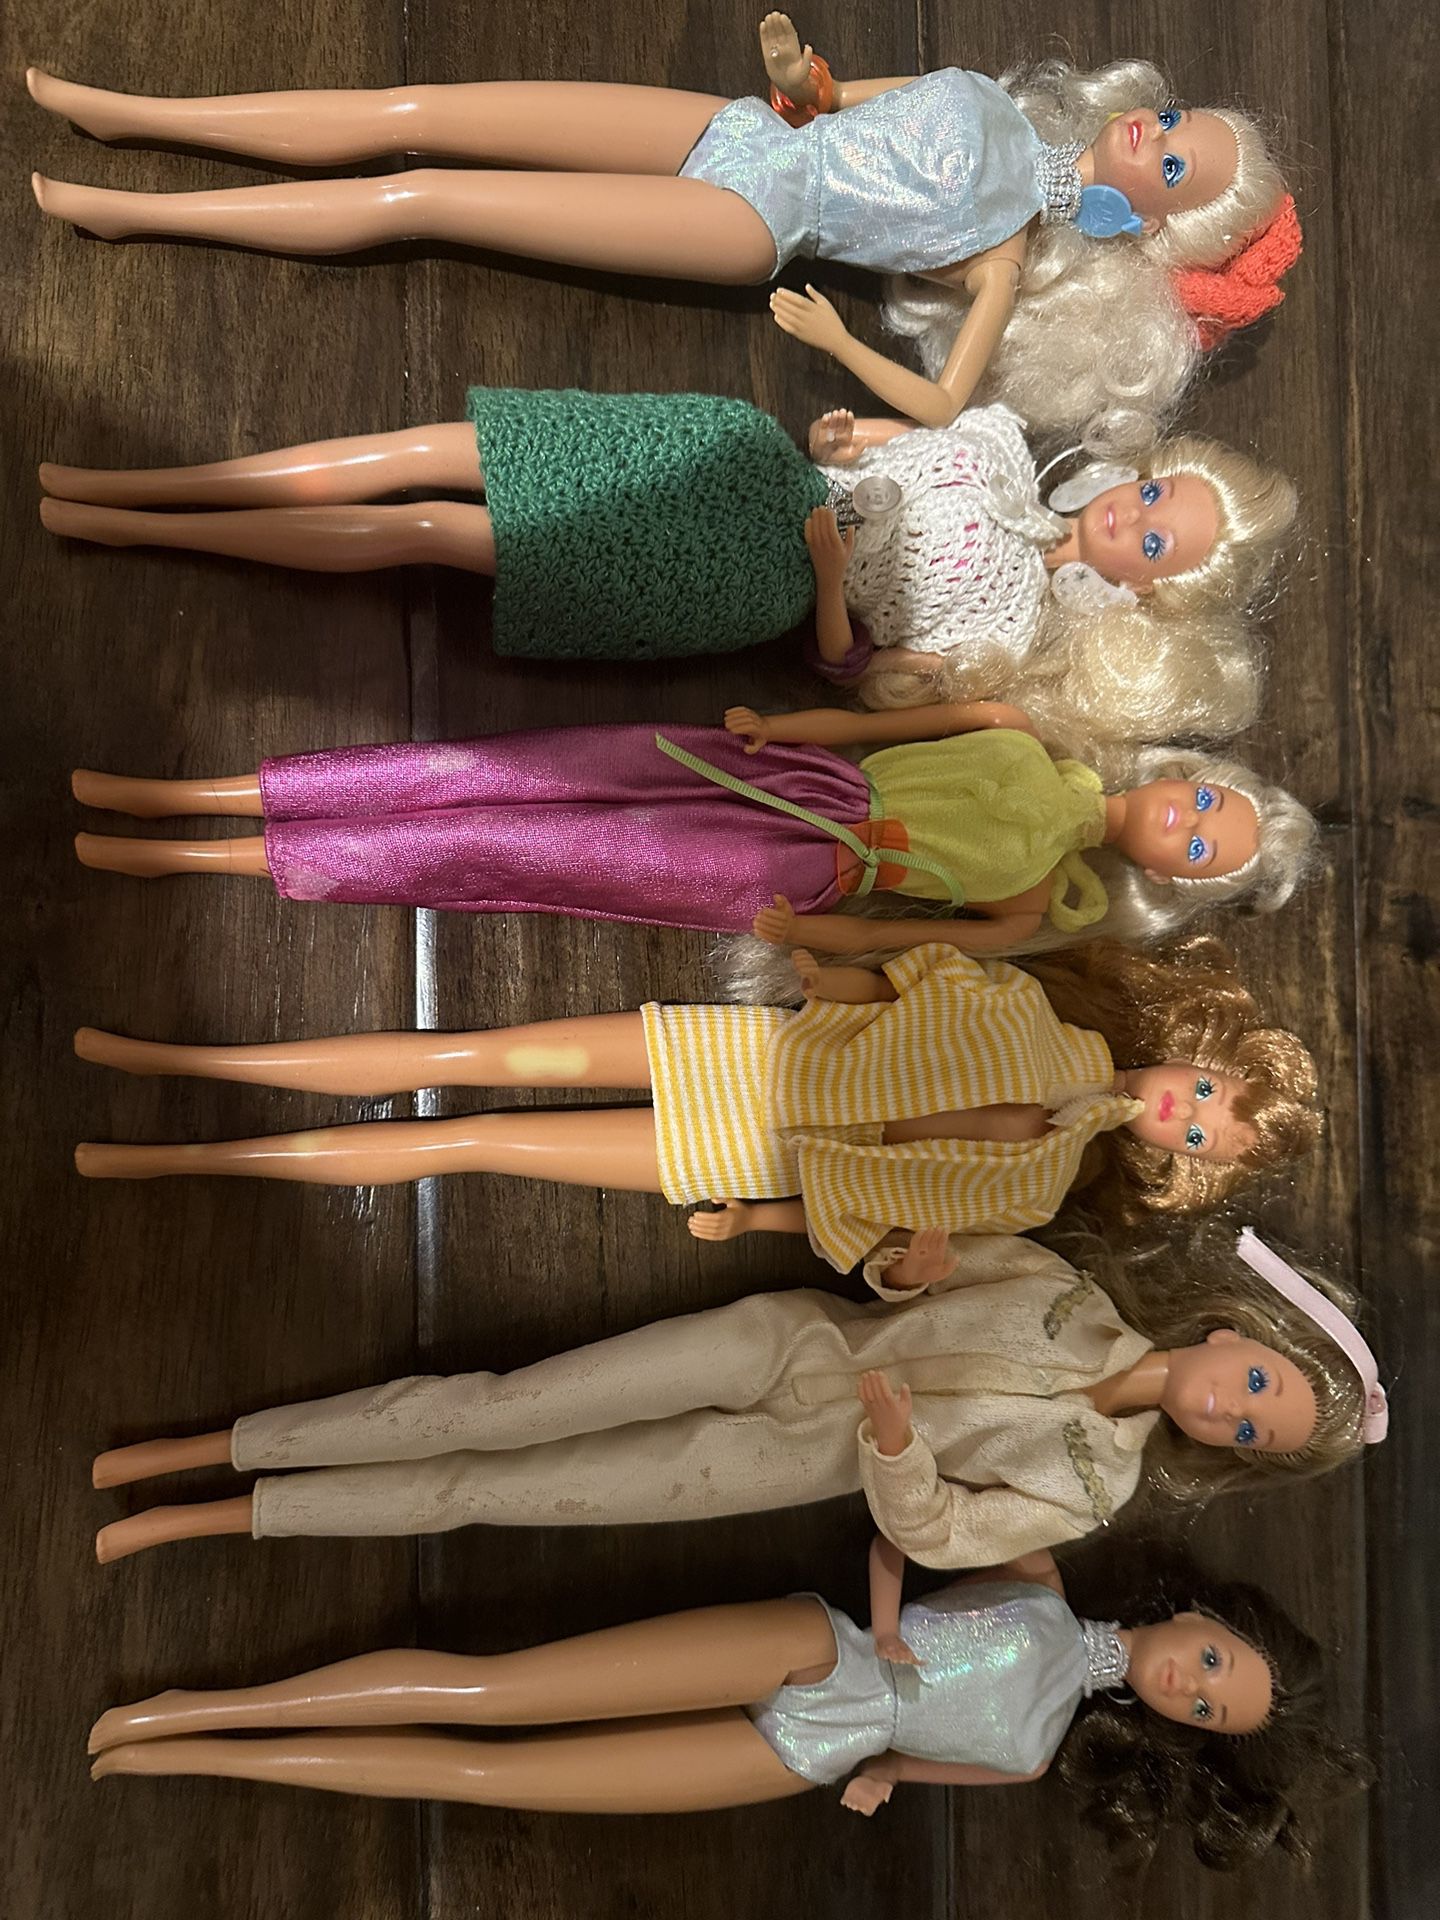 80’s Barbie Dolls With Clothes.